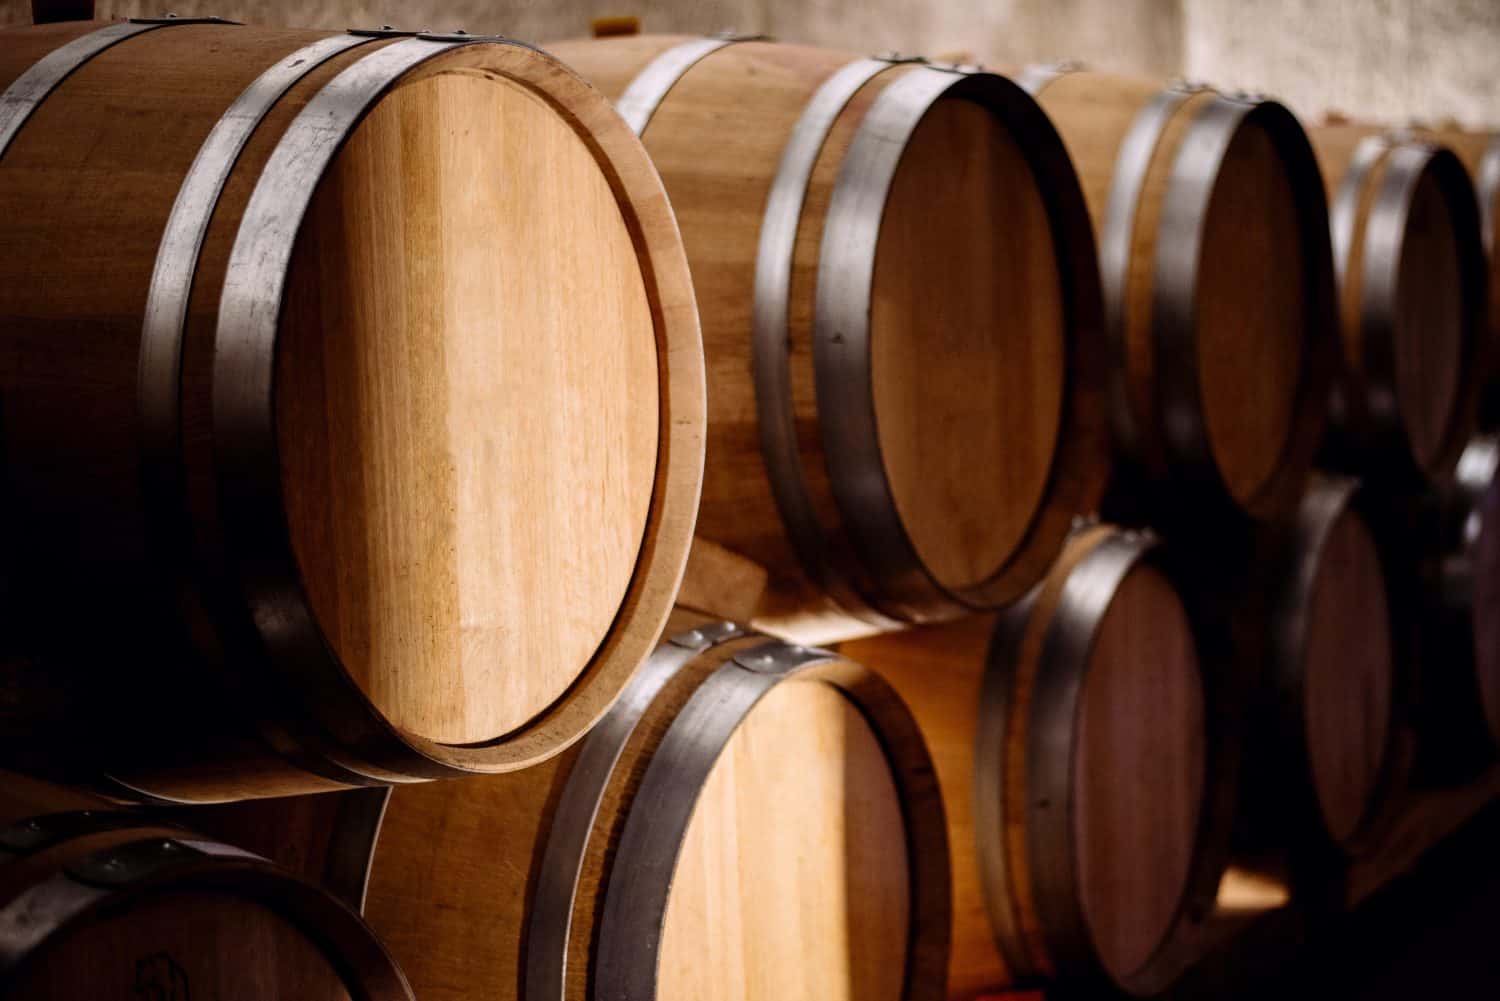 Wooden barrels with silver metal rings, in a wine cellar